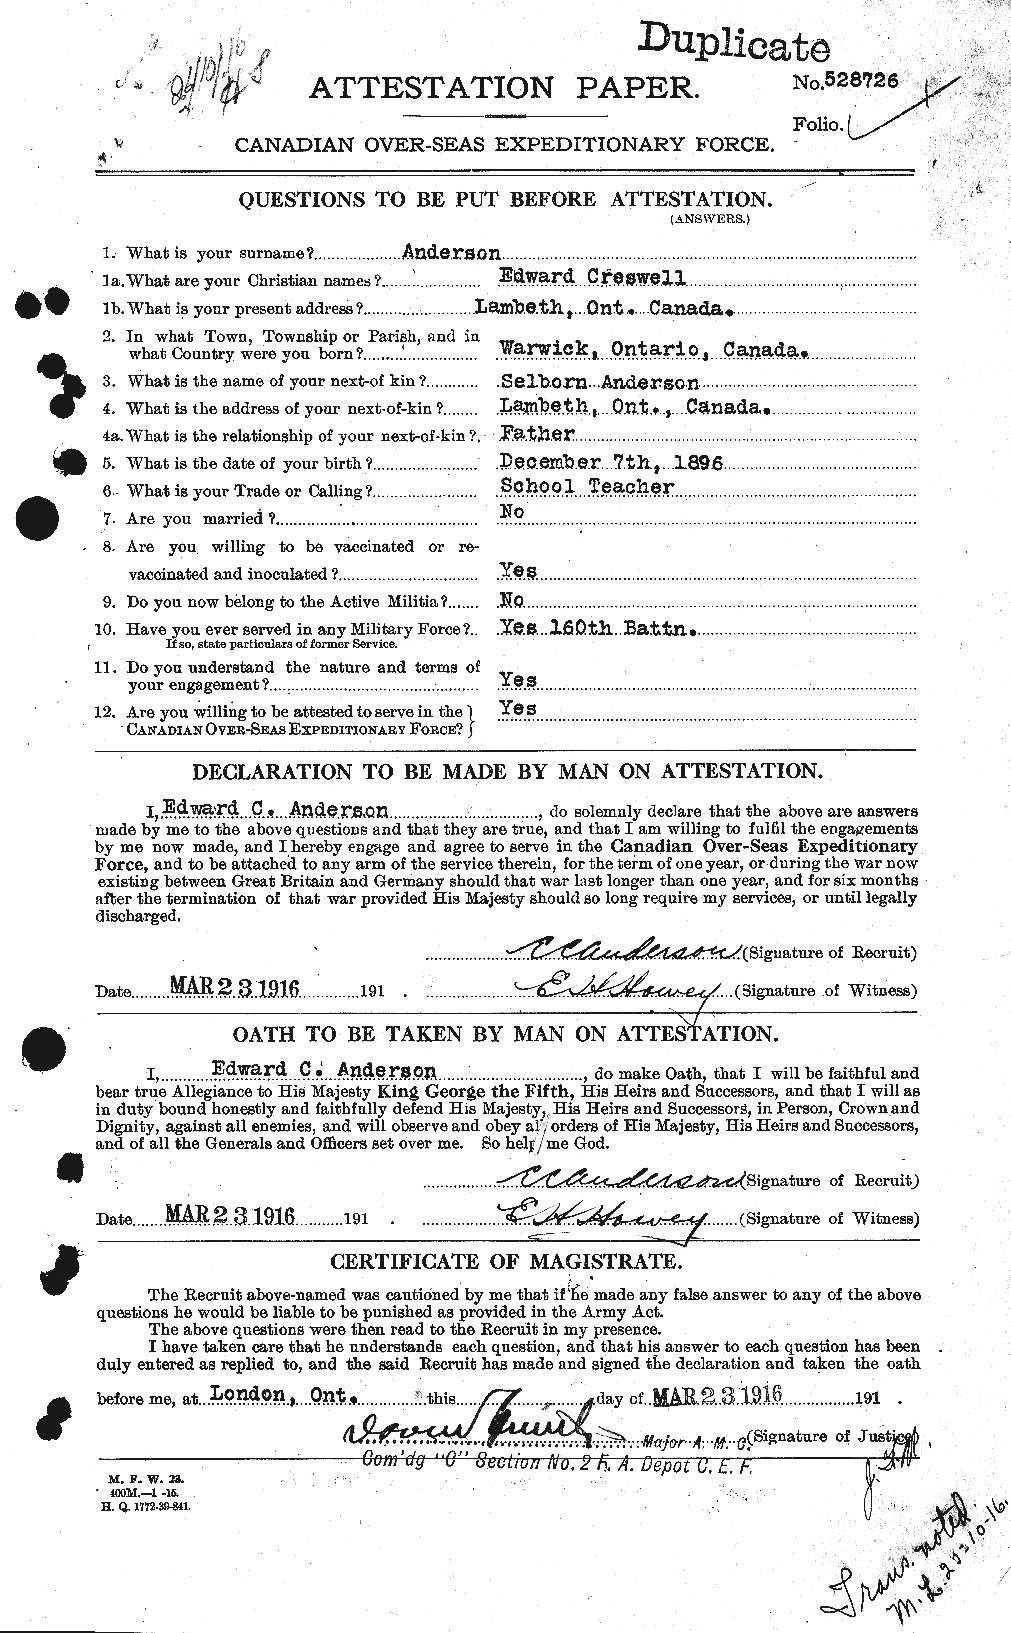 Personnel Records of the First World War - CEF 209938a